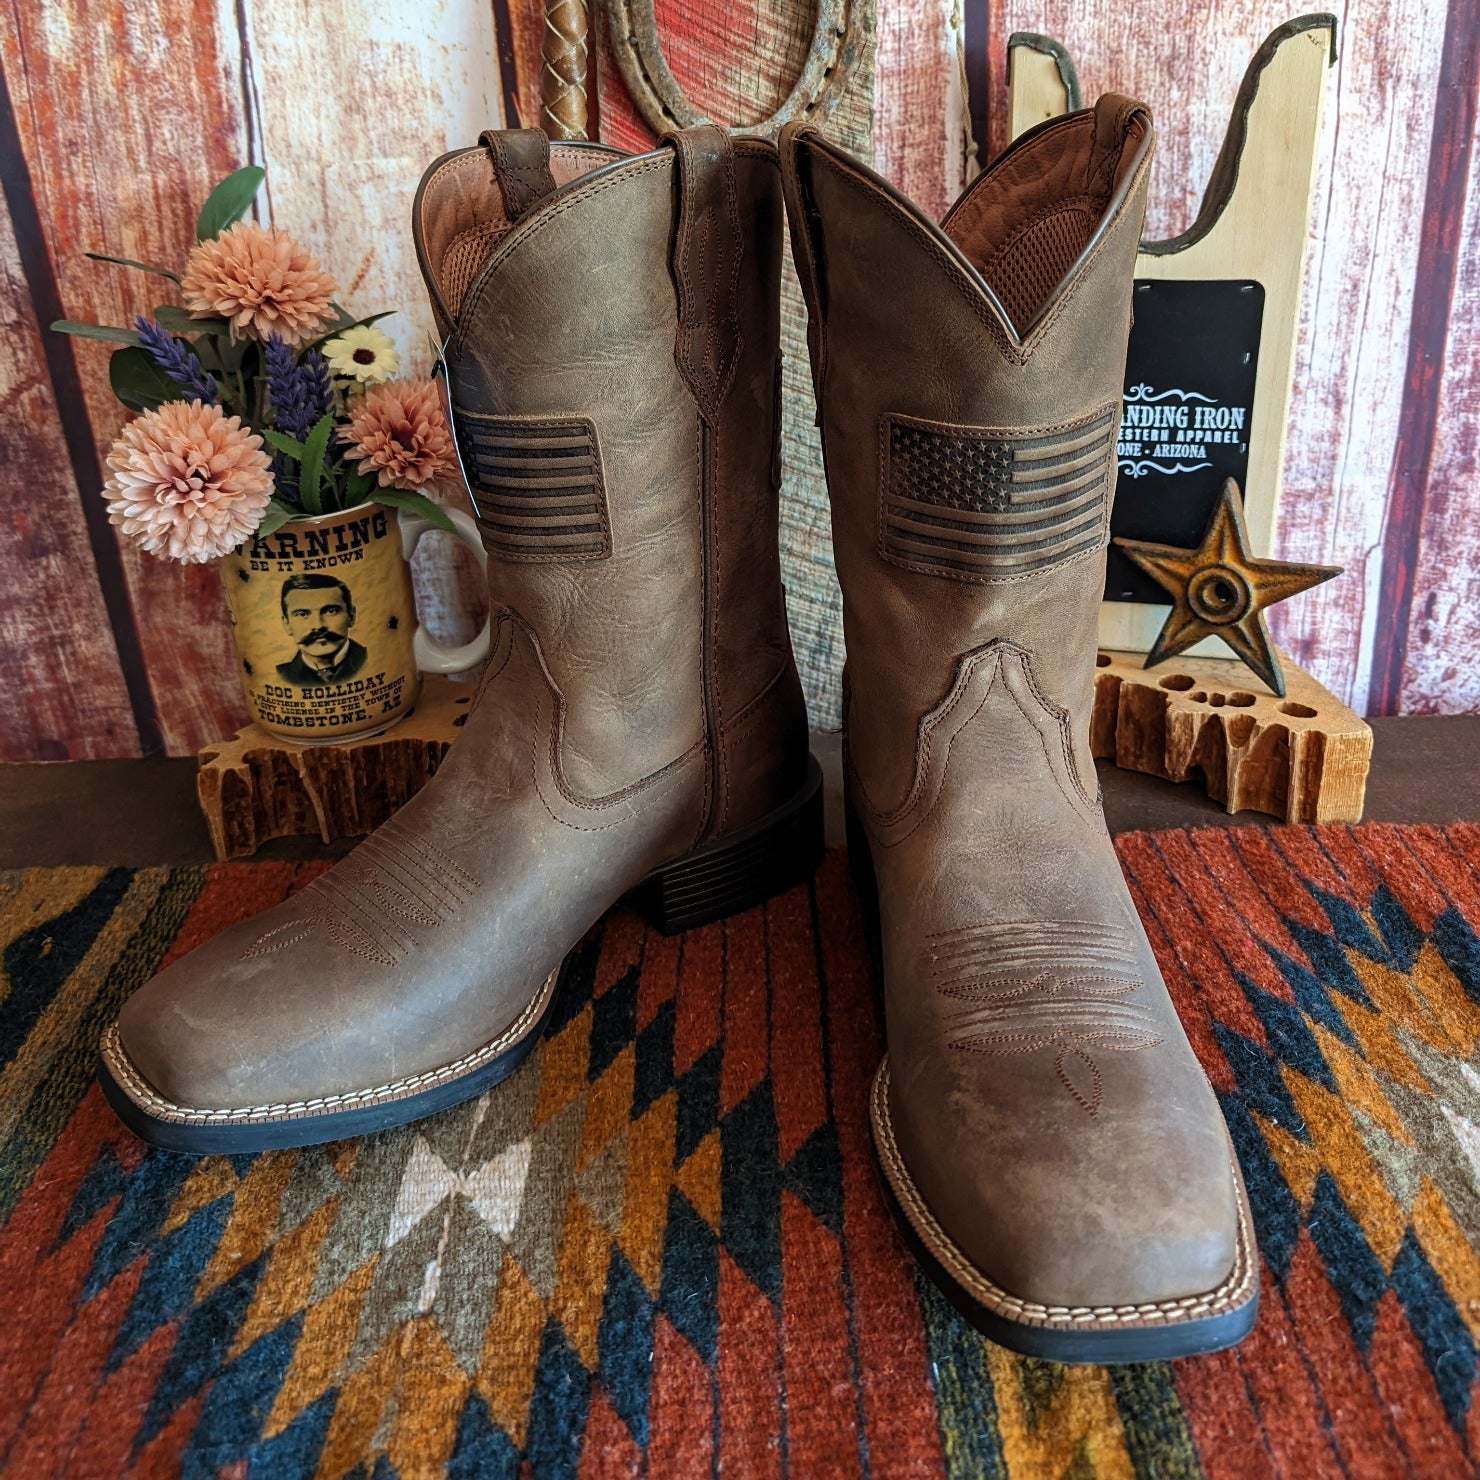 Men's Leather Cowboy Boots the Sport Patriot II by Ariat 10031444 – The  Branding Iron-Tombstone, AZ